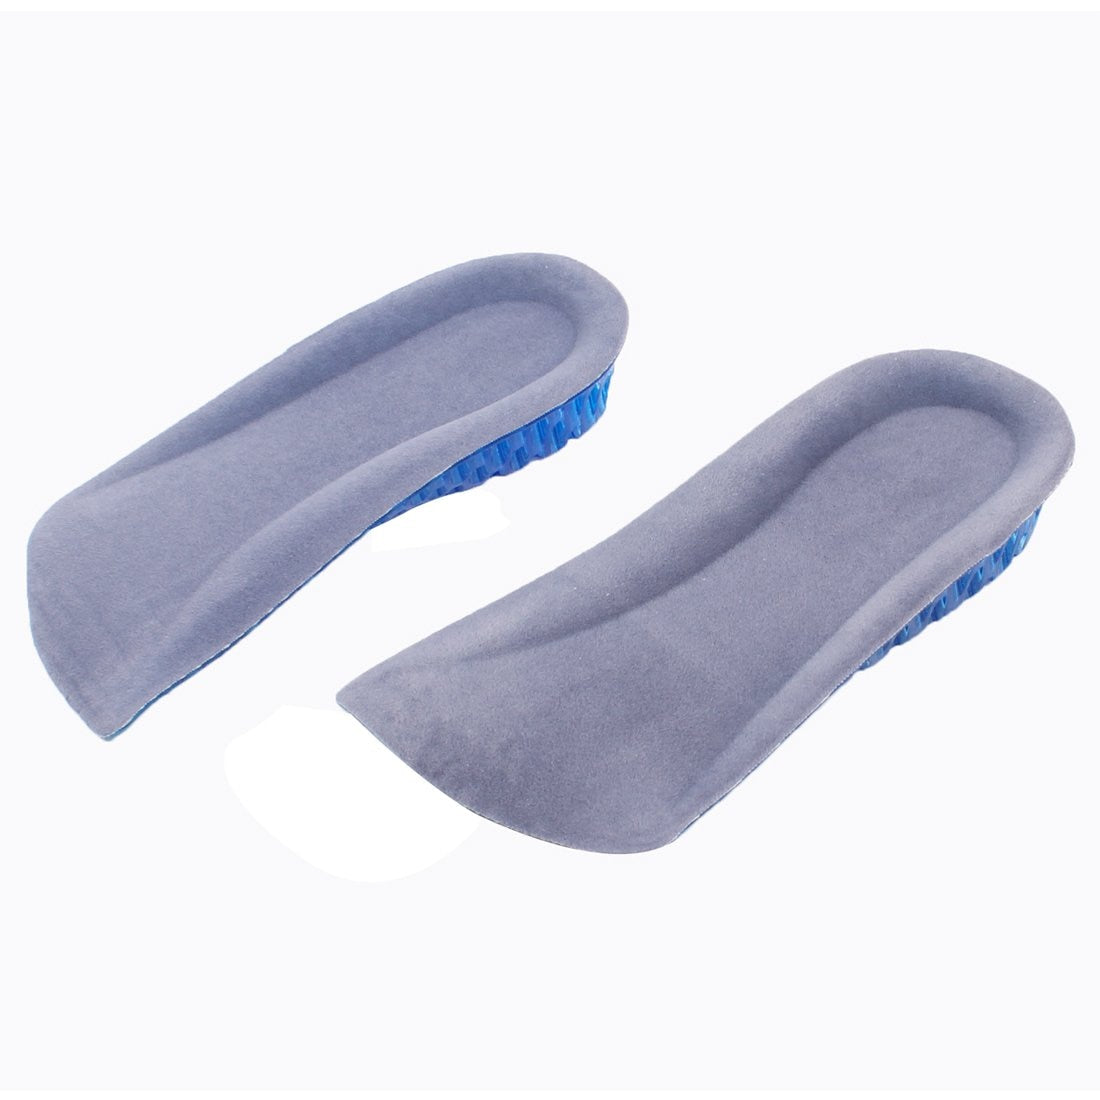 Hot-2 Pcs Clear Blue Gray 1.1" Height Heel Increase Silicone Gel Insoles Pads - ebowsos